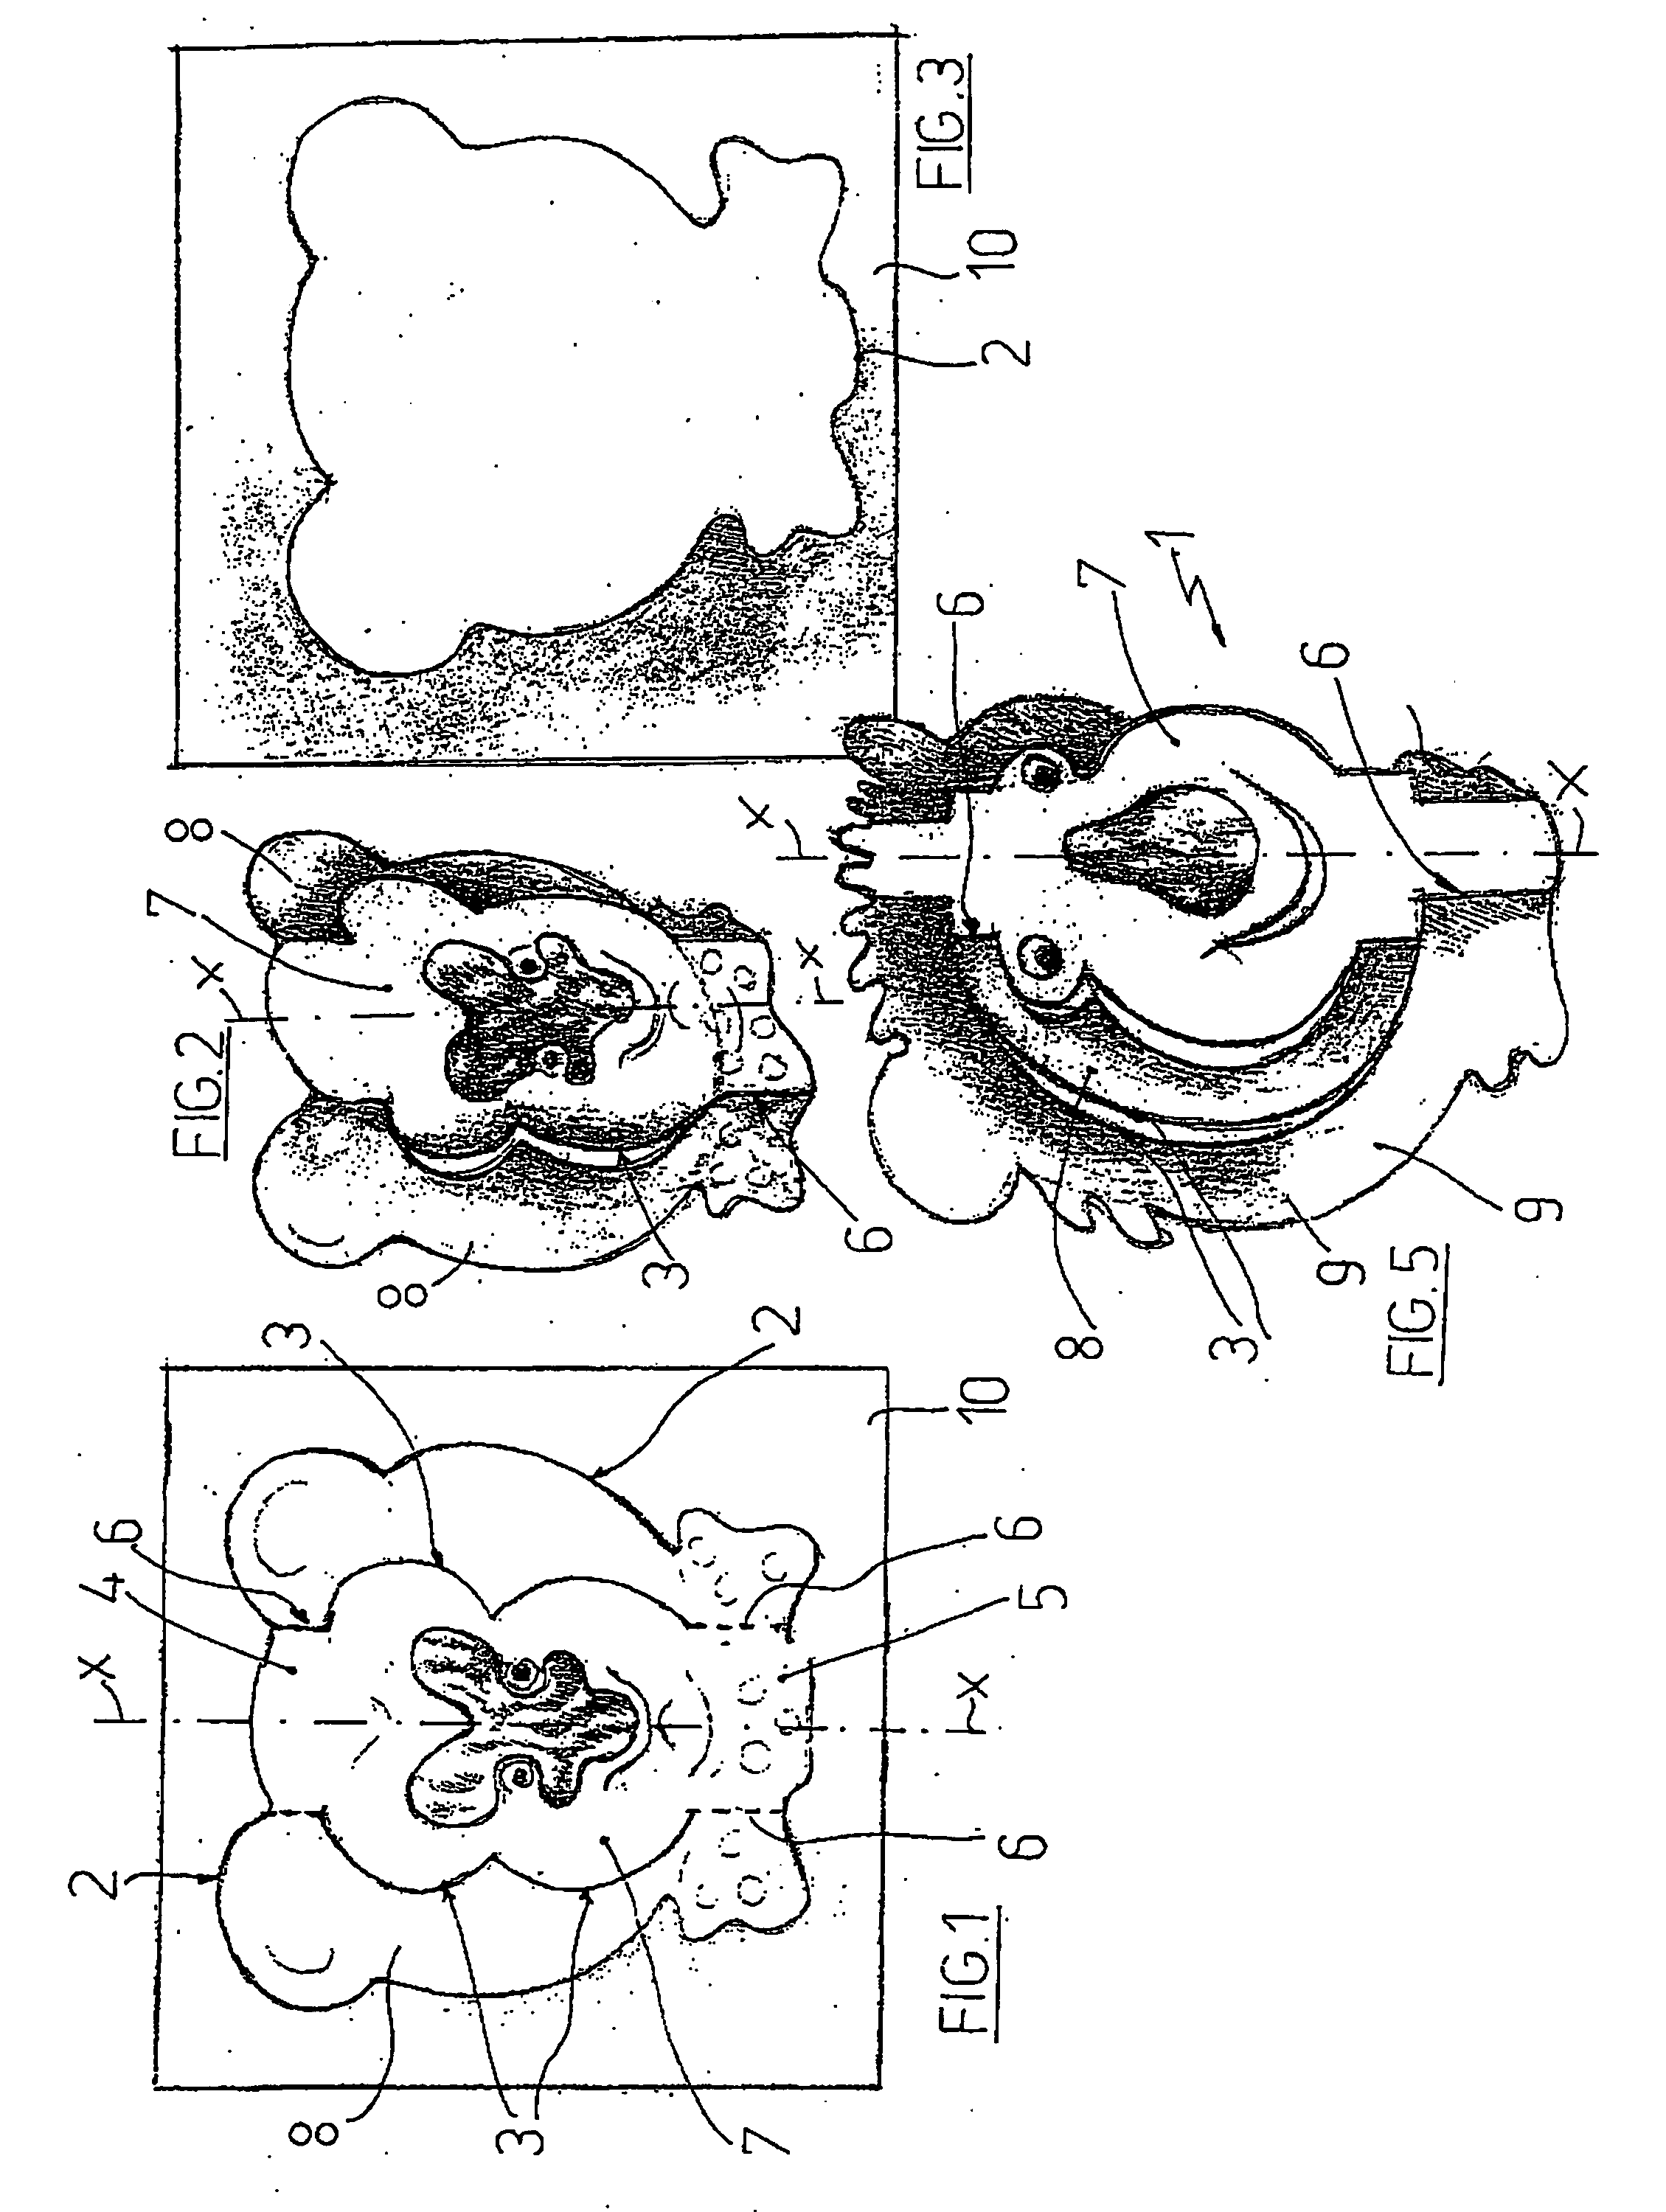 Structure and composition for a mask and its container